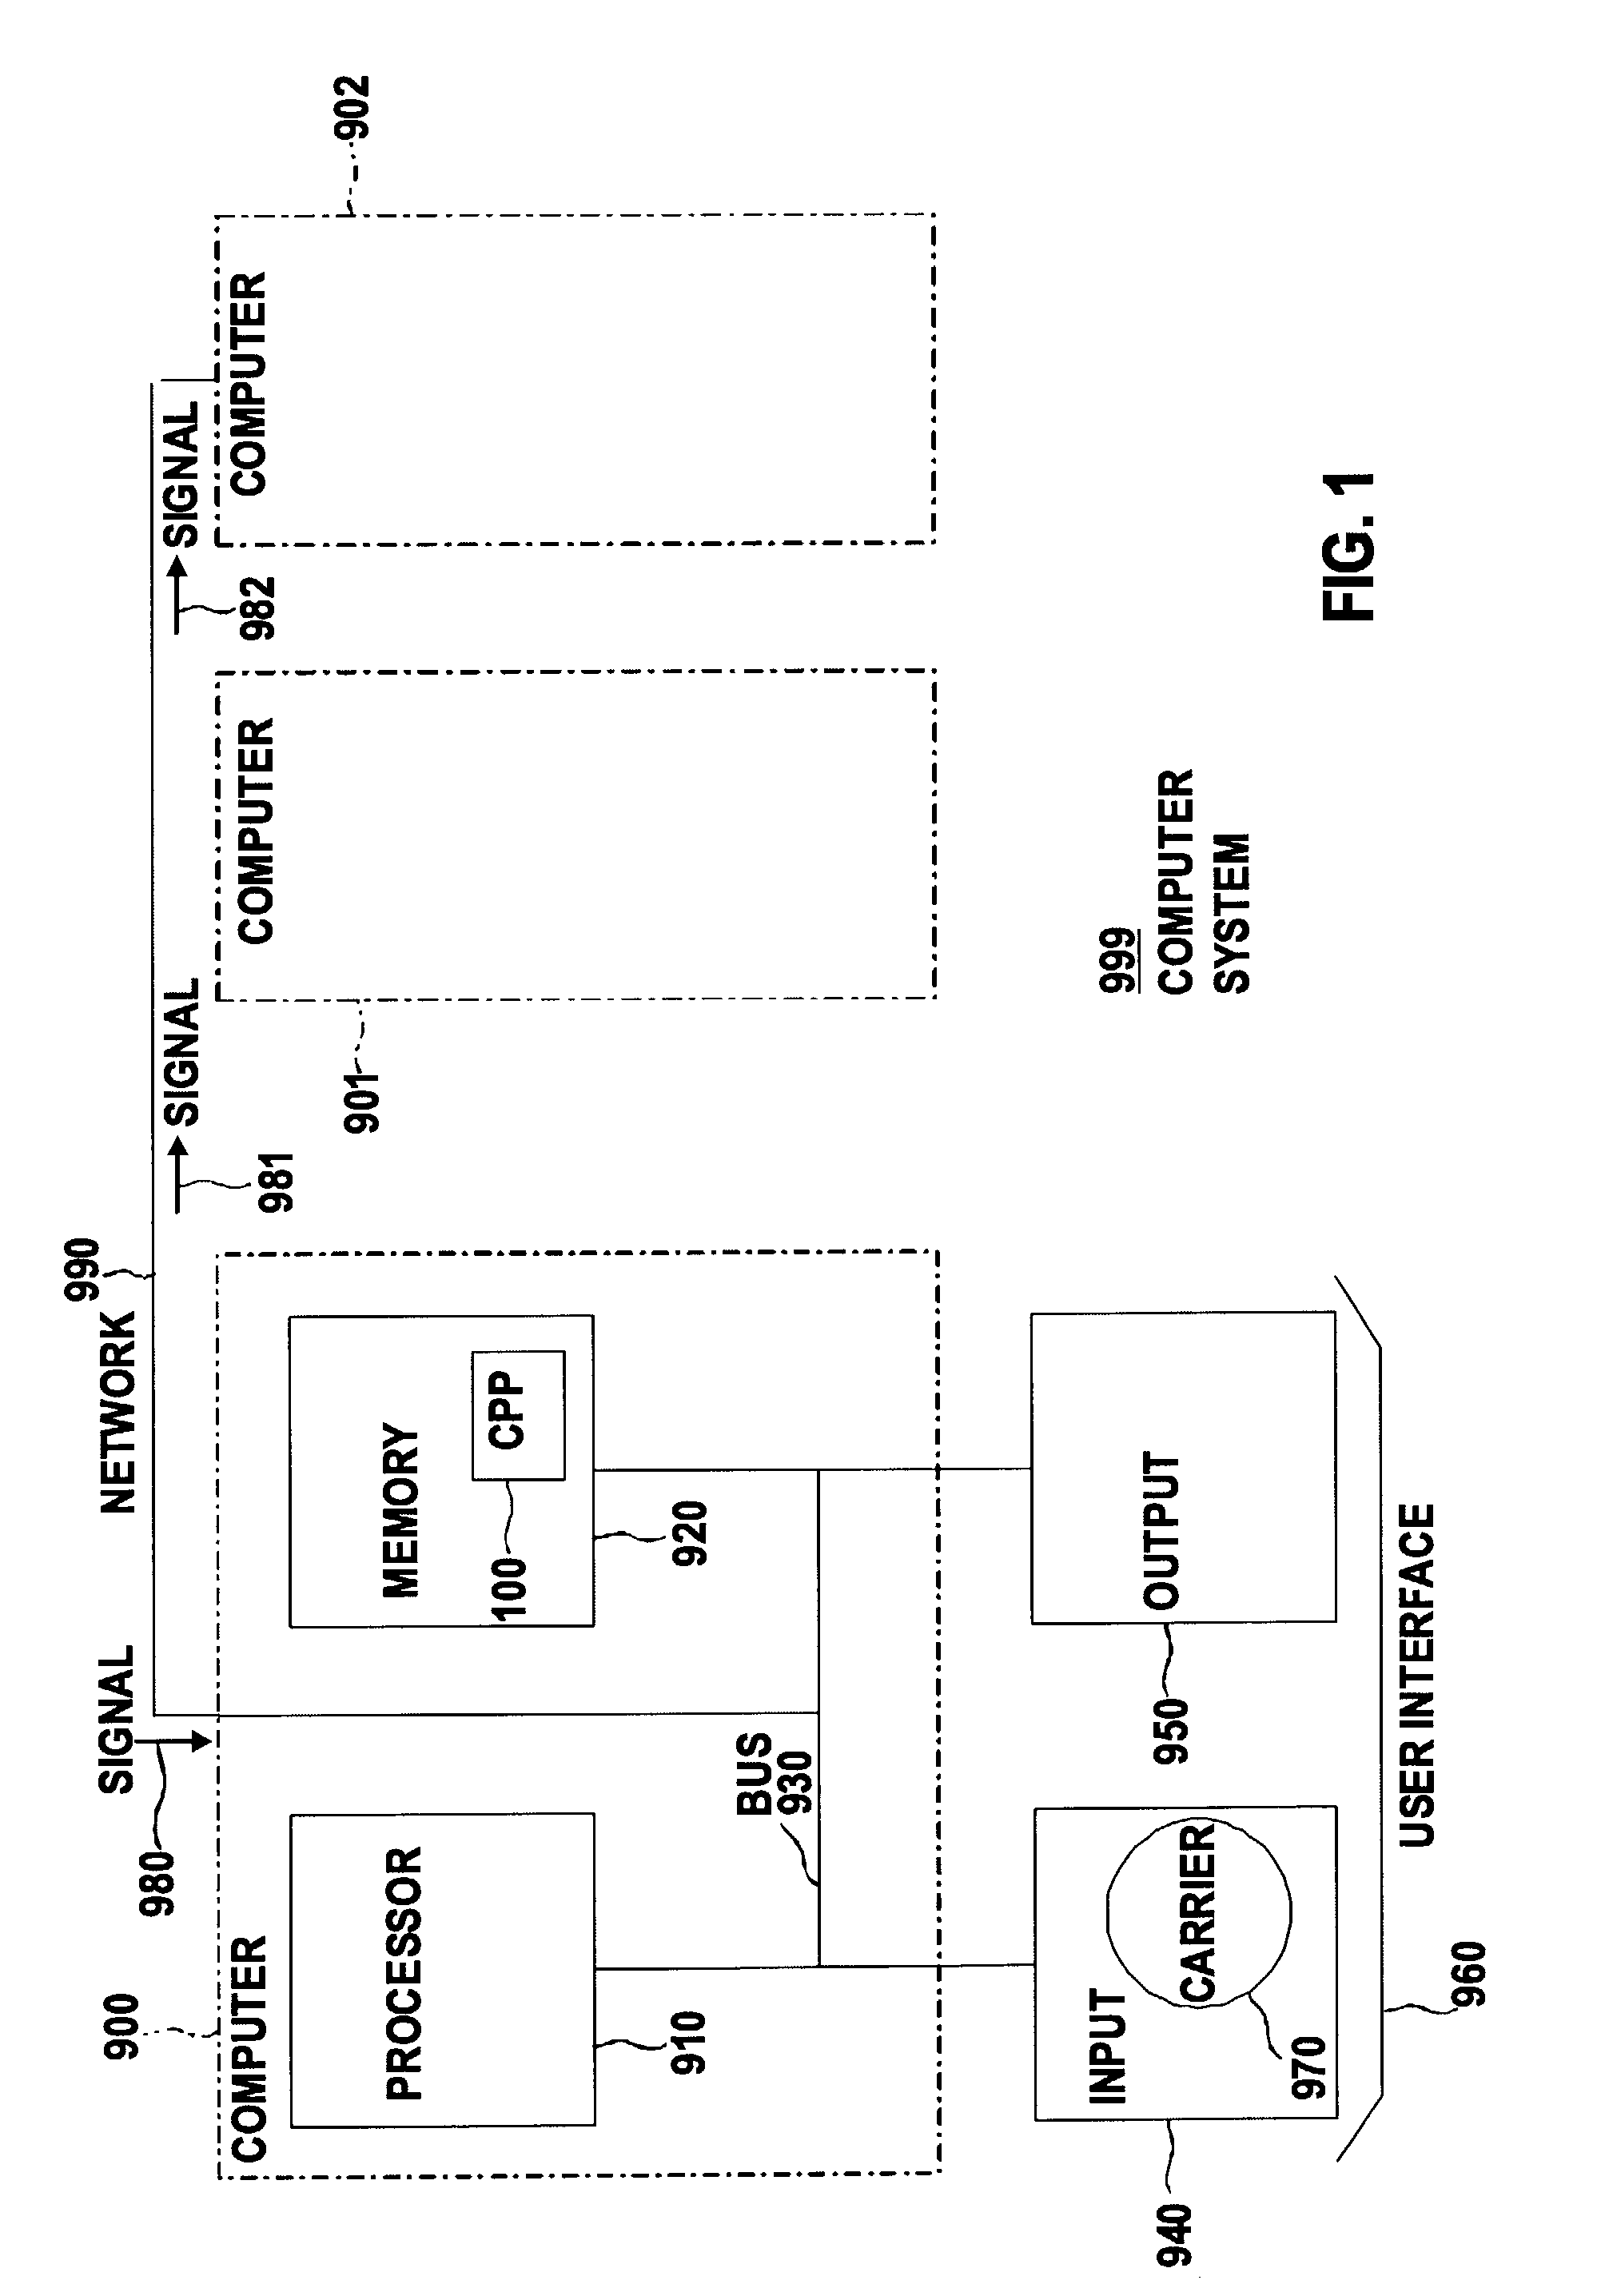 Methods and systems for providing a document with interactive elements to retrieve information for processing by business applications